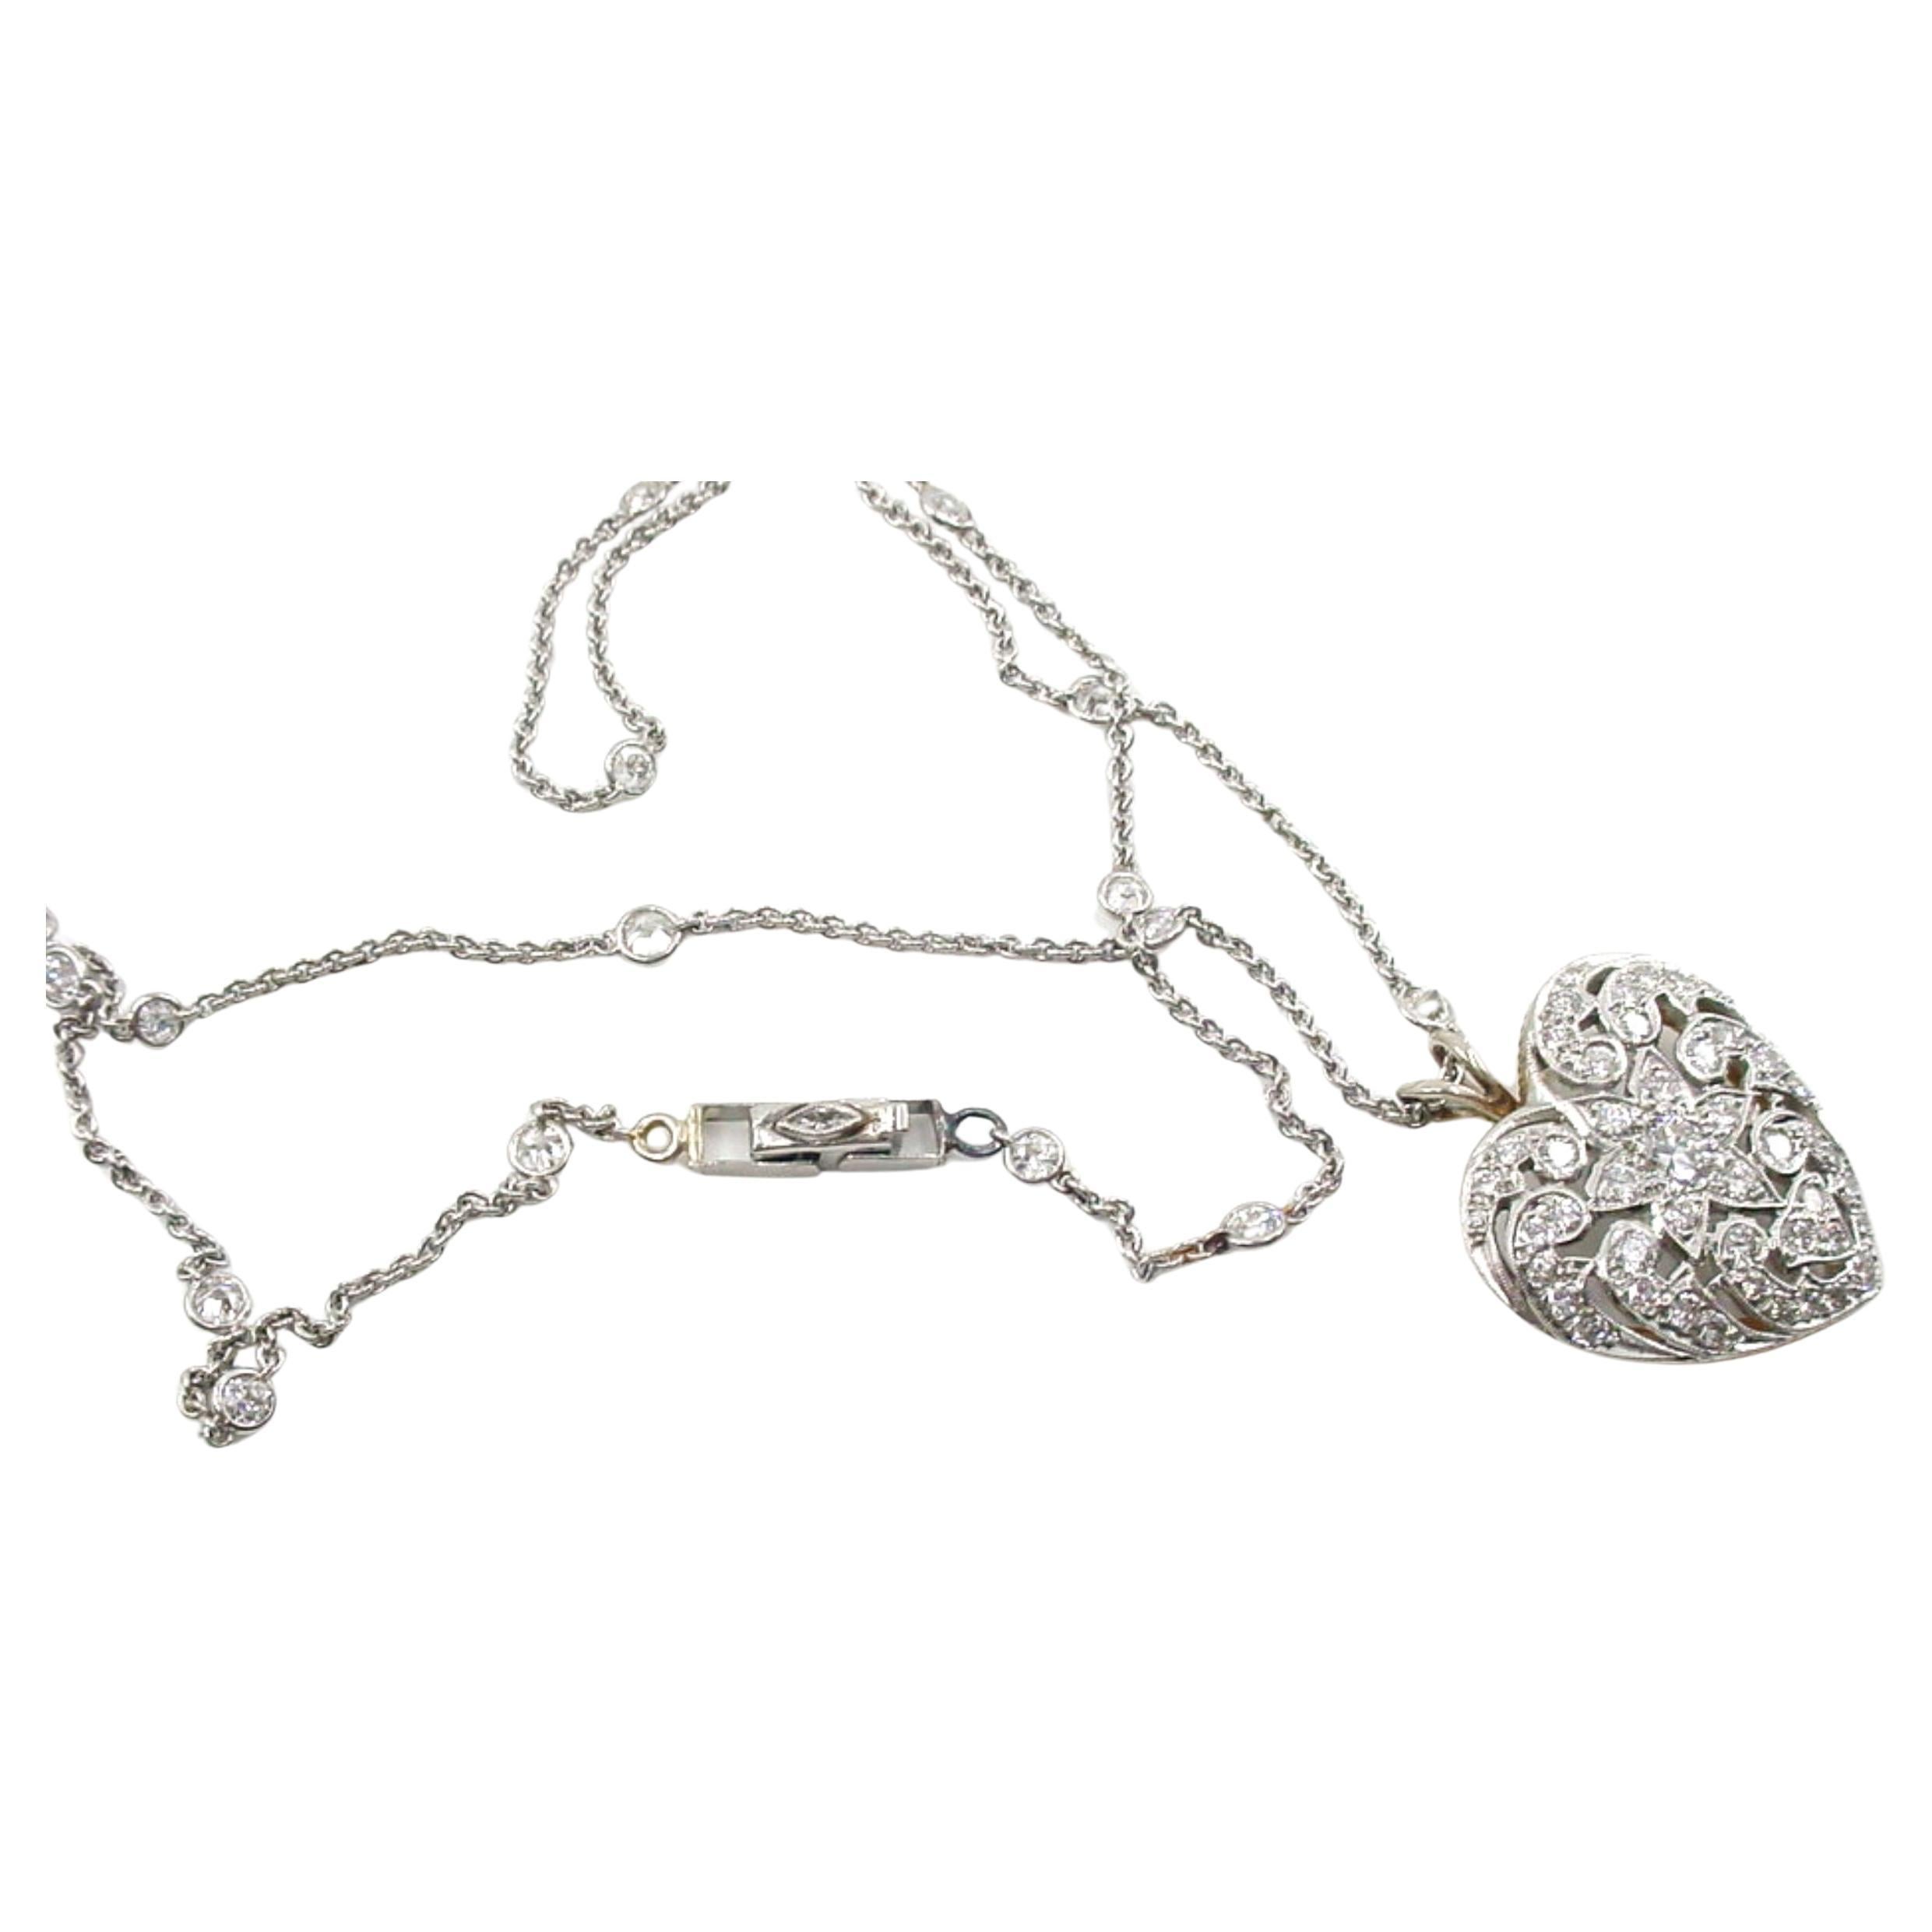 Exceptional Edwardian Platinum 1.95 OEC Heart and Diamond Station Chain Necklace For Sale